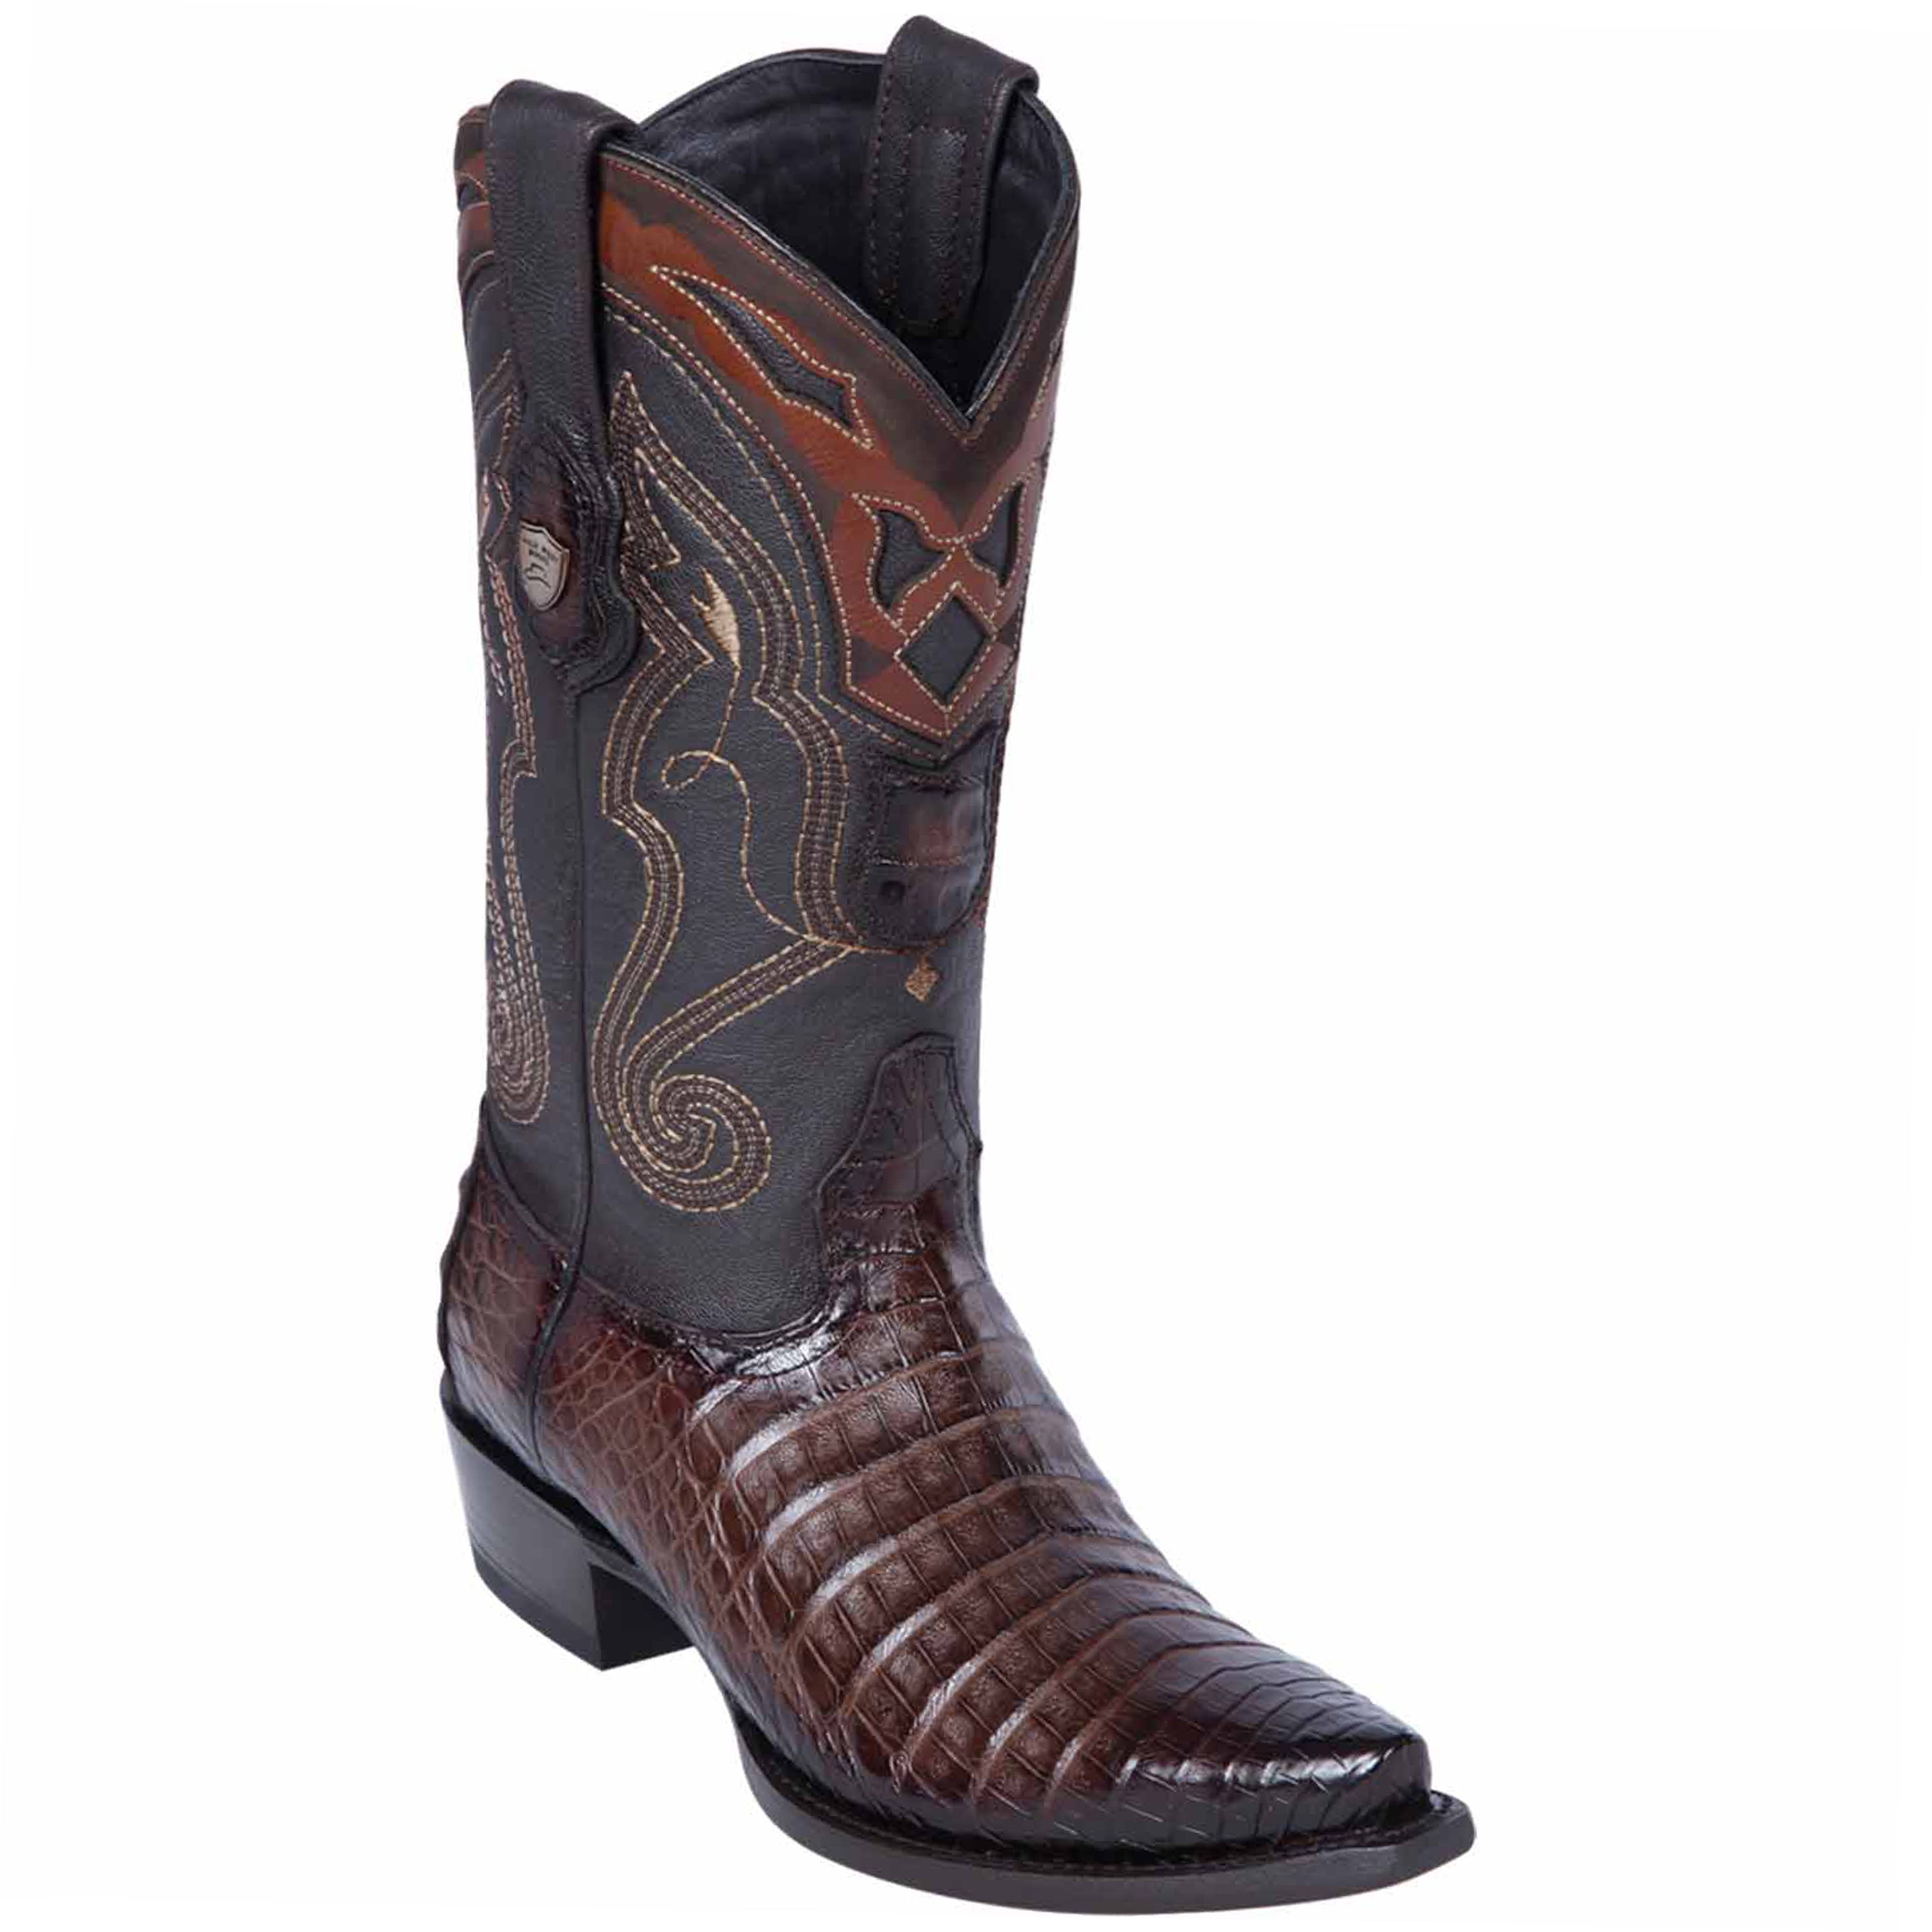 Mens Caiman Boots Brown Snip Toe - Wild West Boots